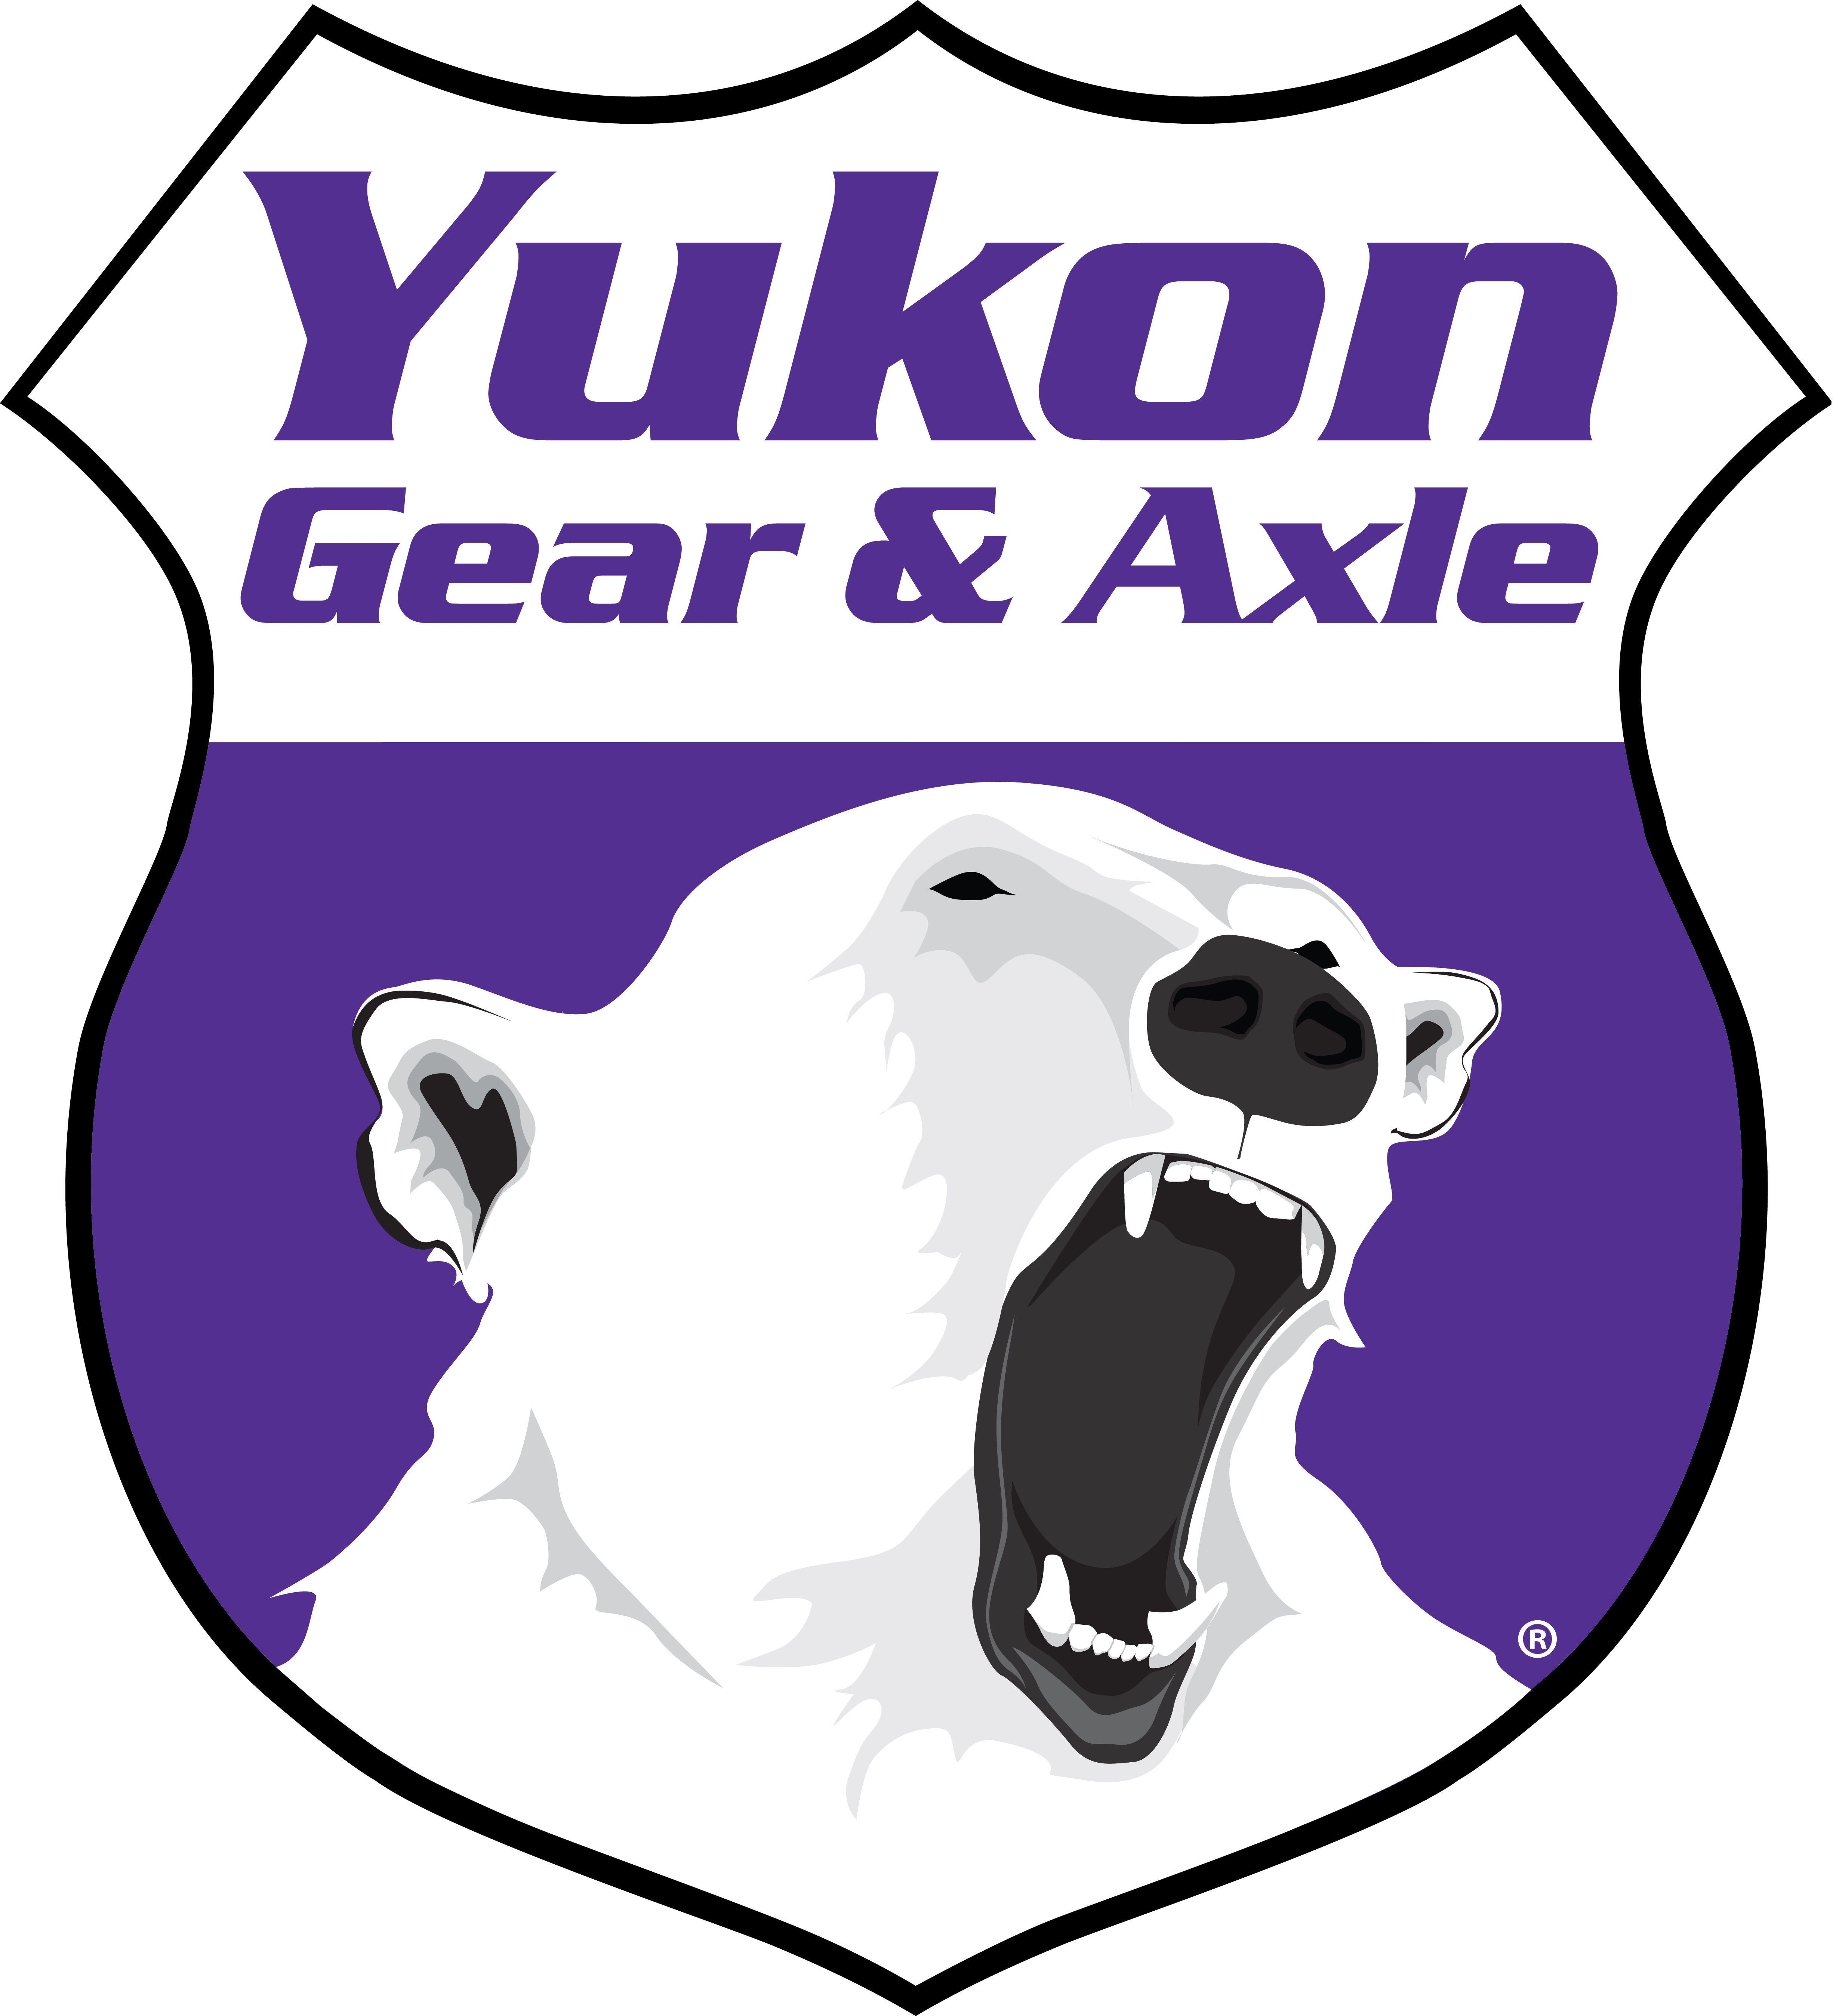 Yukon standard open spider gear kit for GM 7.2" S10 and S15 IFS 